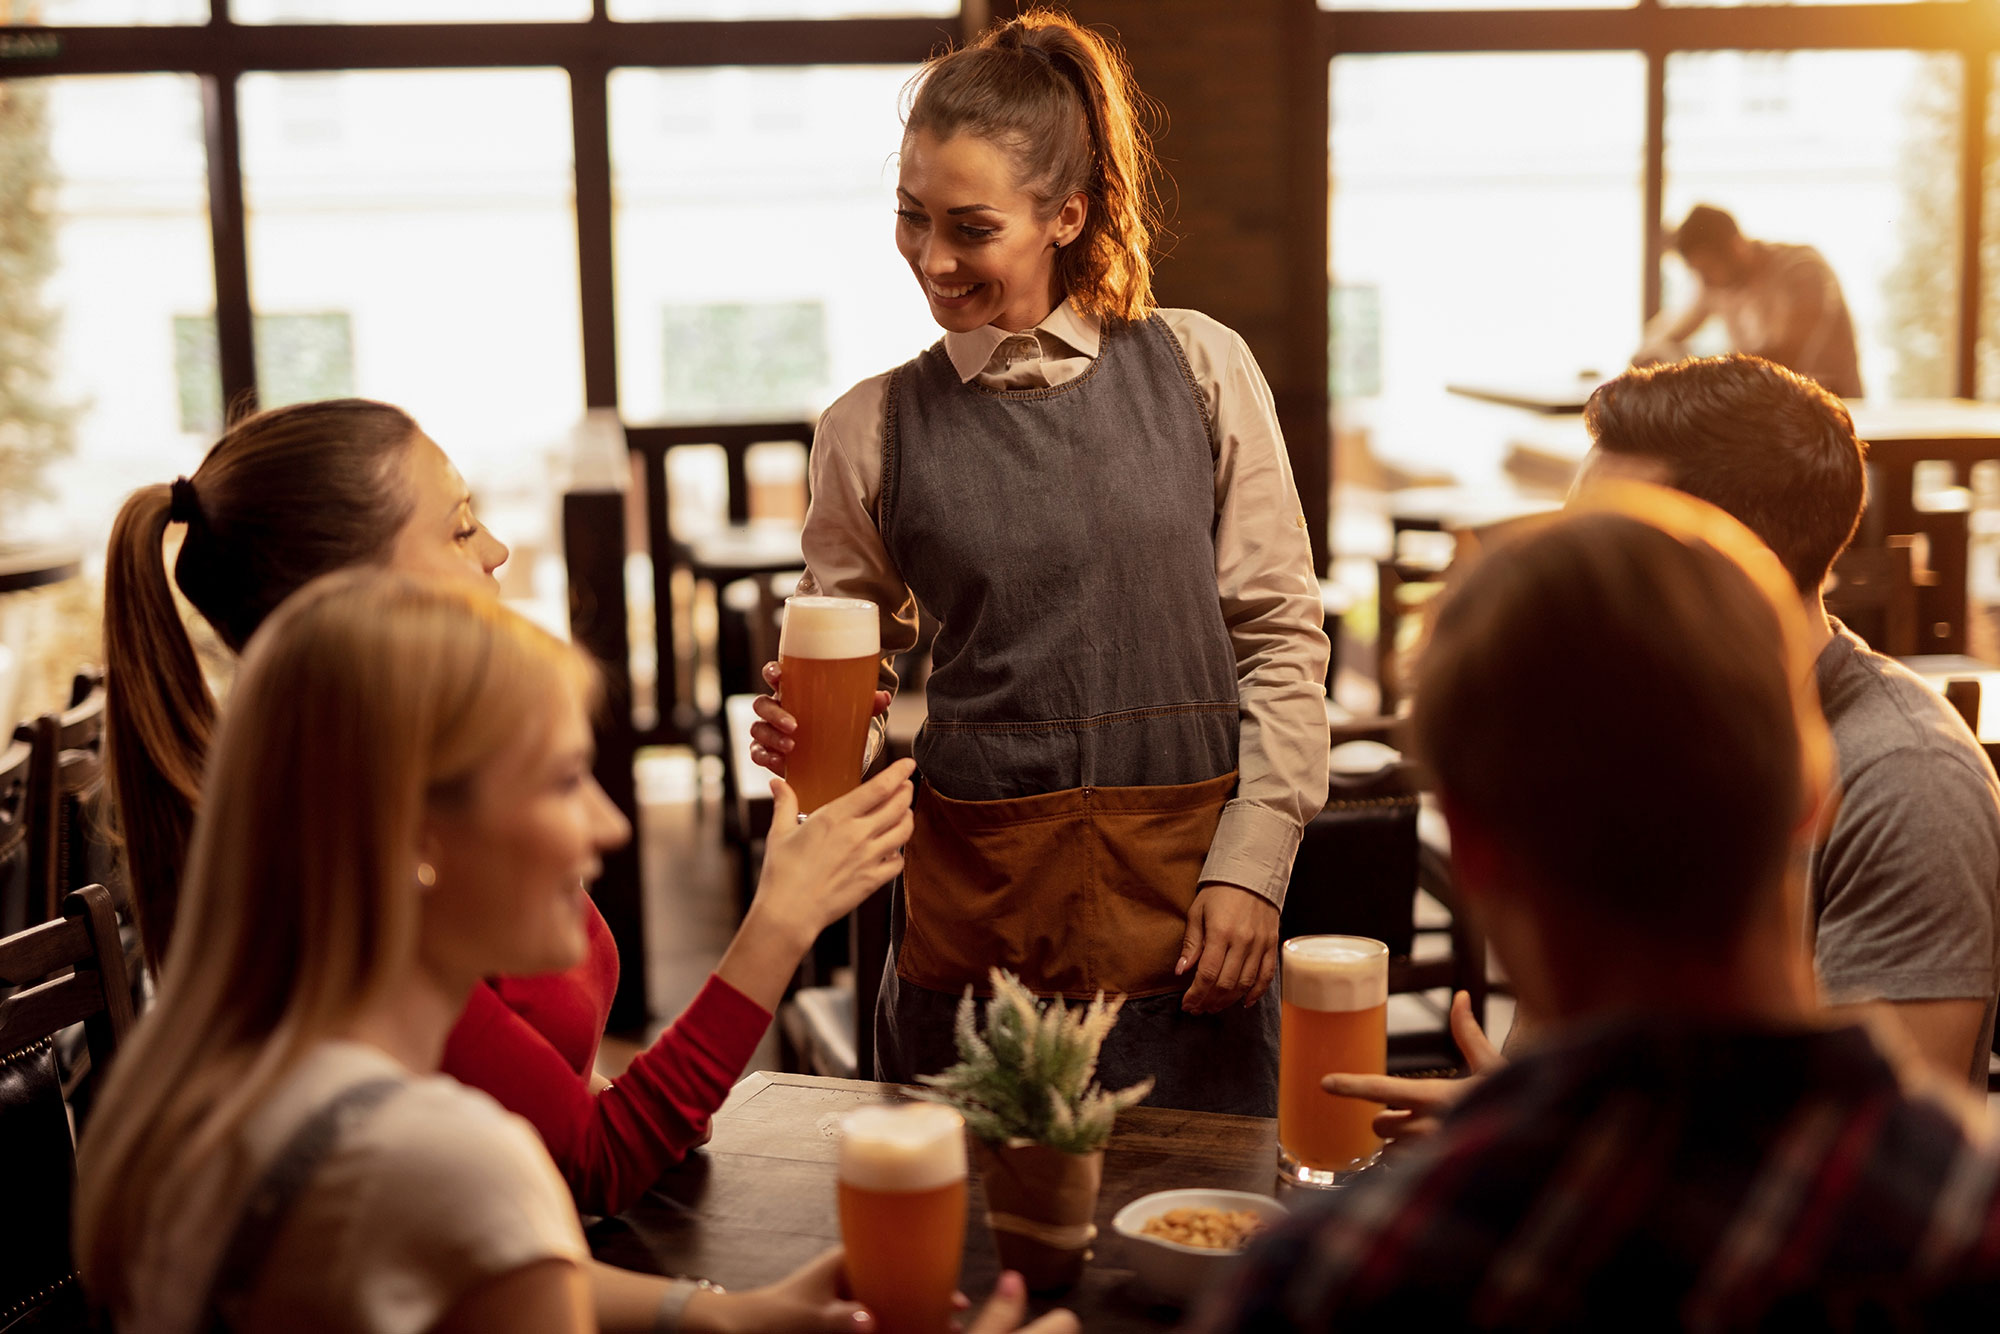 Prevent Your Restaurant From Selling Alcohol to Minors